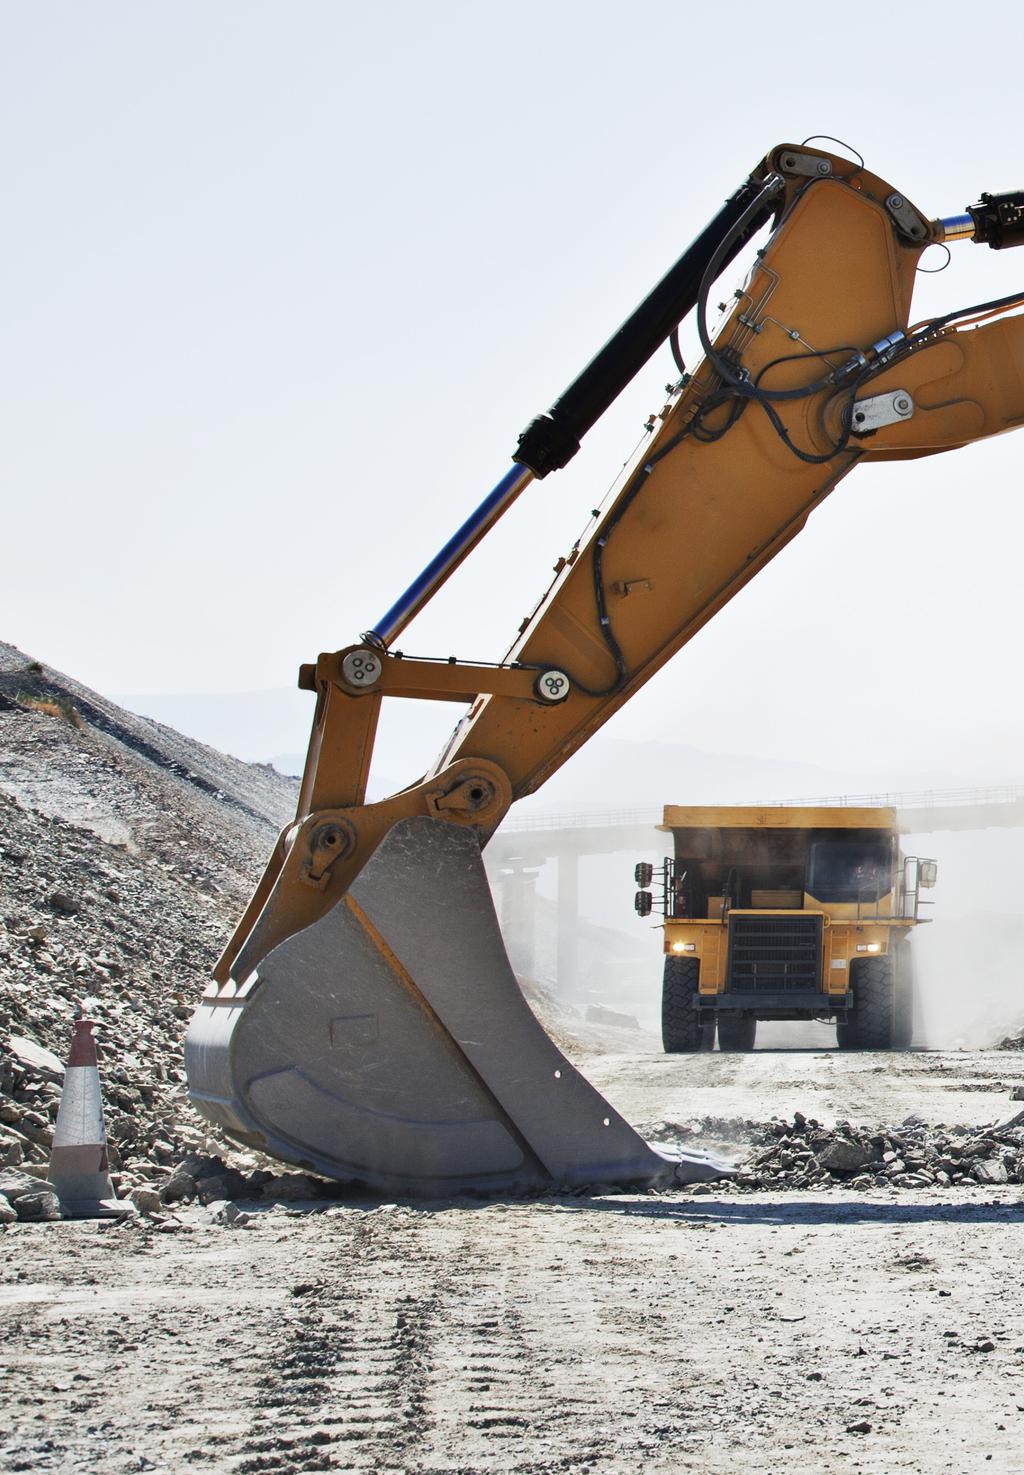 MINING & MINERALS Mines and quarries are riddled with large, heavyduty machines built specifically for crushing and drilling through solid rock.